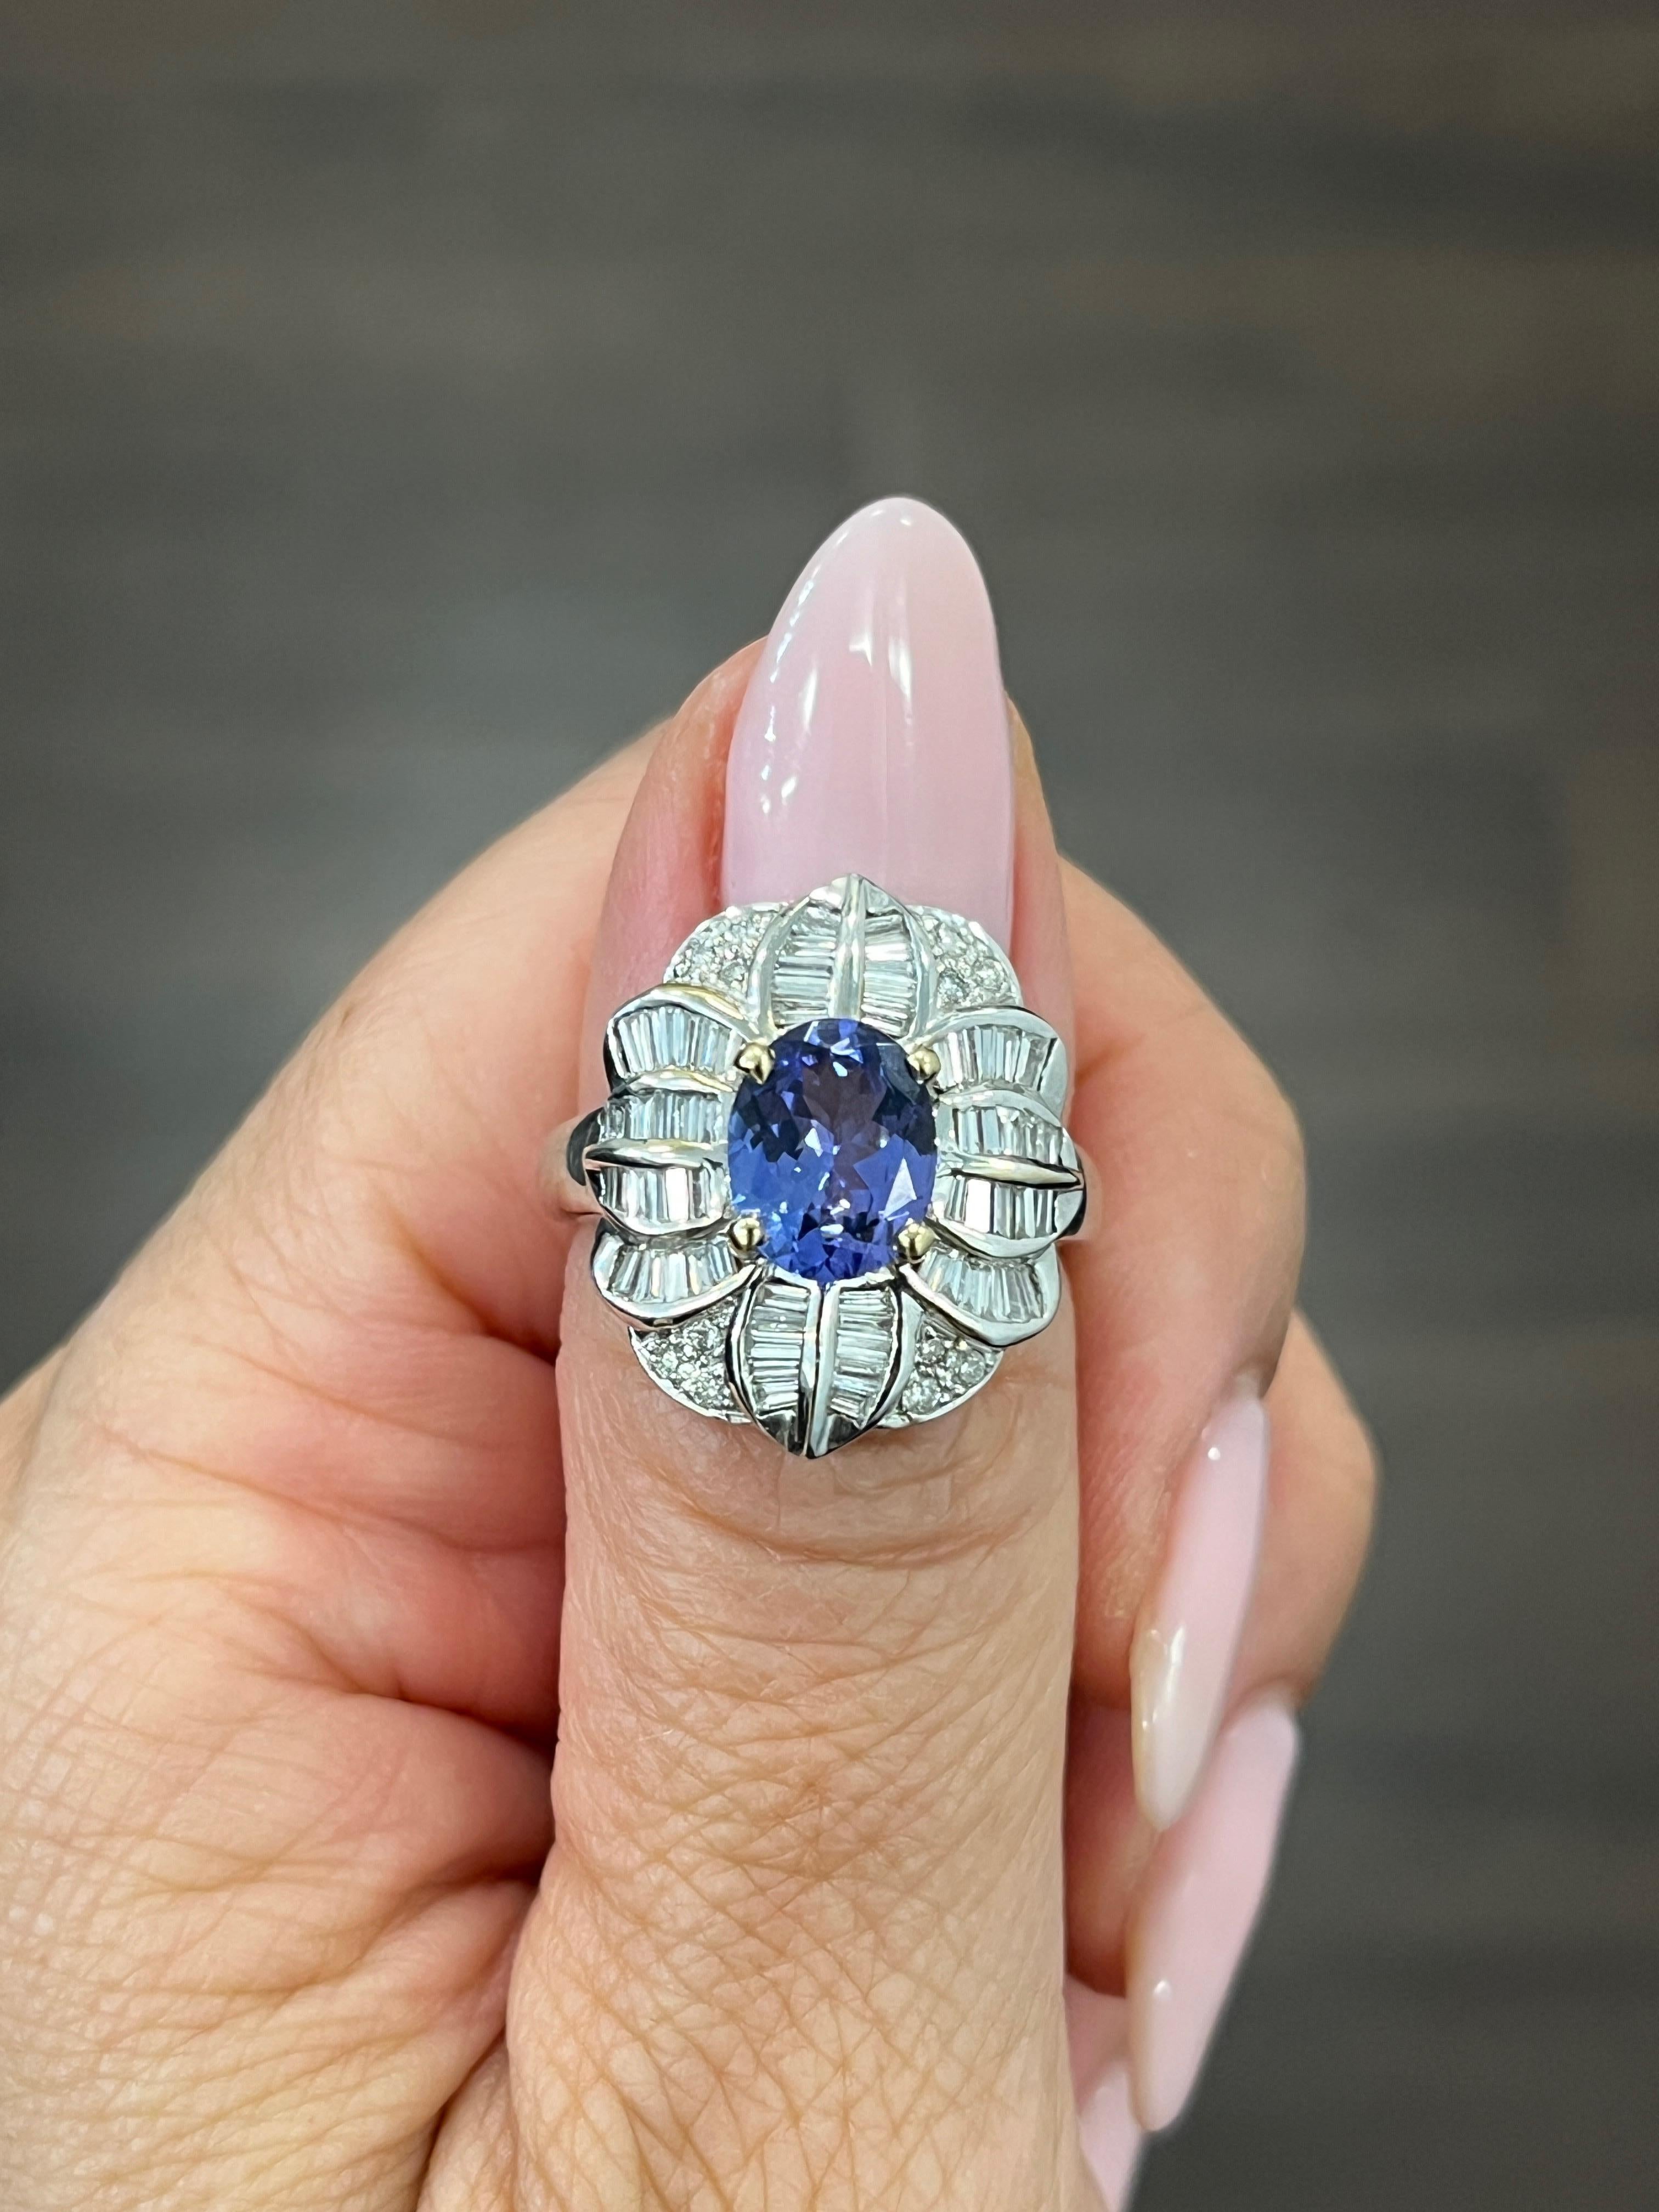 This stunning ring features a beautiful oval tanzanite gemstone in a striking blue color, surrounded by sparkling diamonds. The ring is crafted from high-quality 14k white gold and is sizable to fit a ring size of 7.25. The total carat weight of the